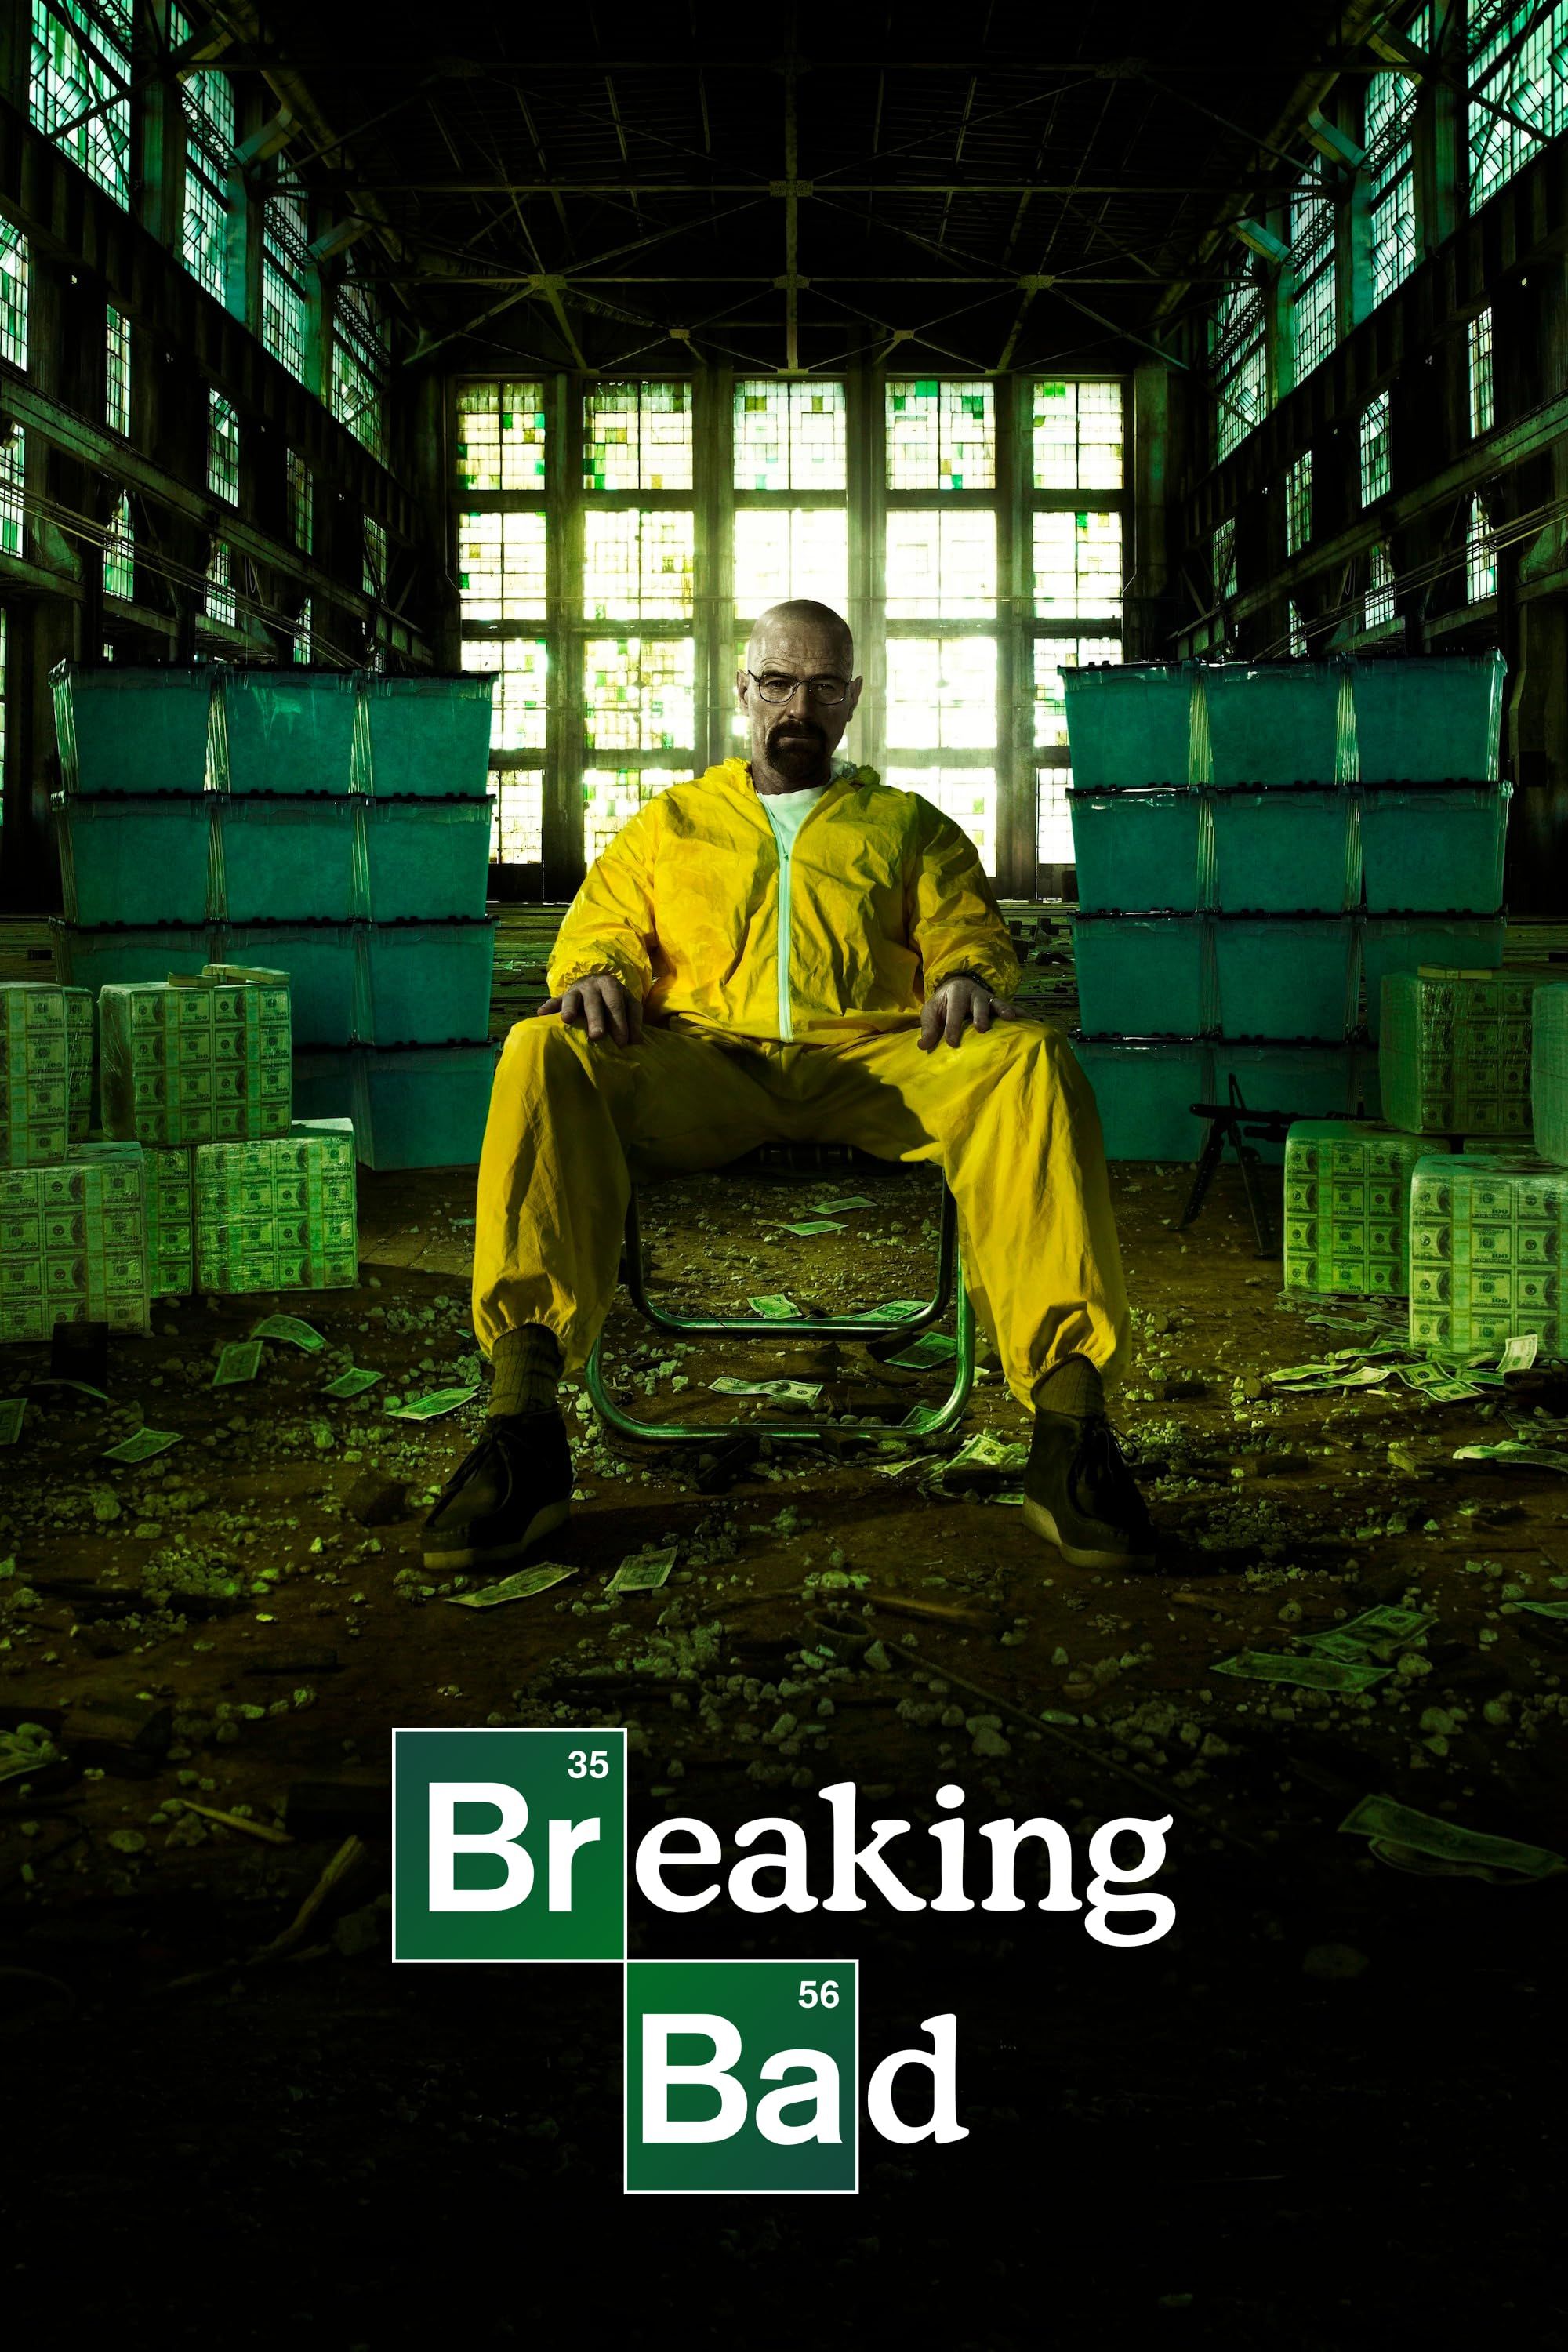 Breaking Bad S02 E03 Hindi Dubbed NF Series